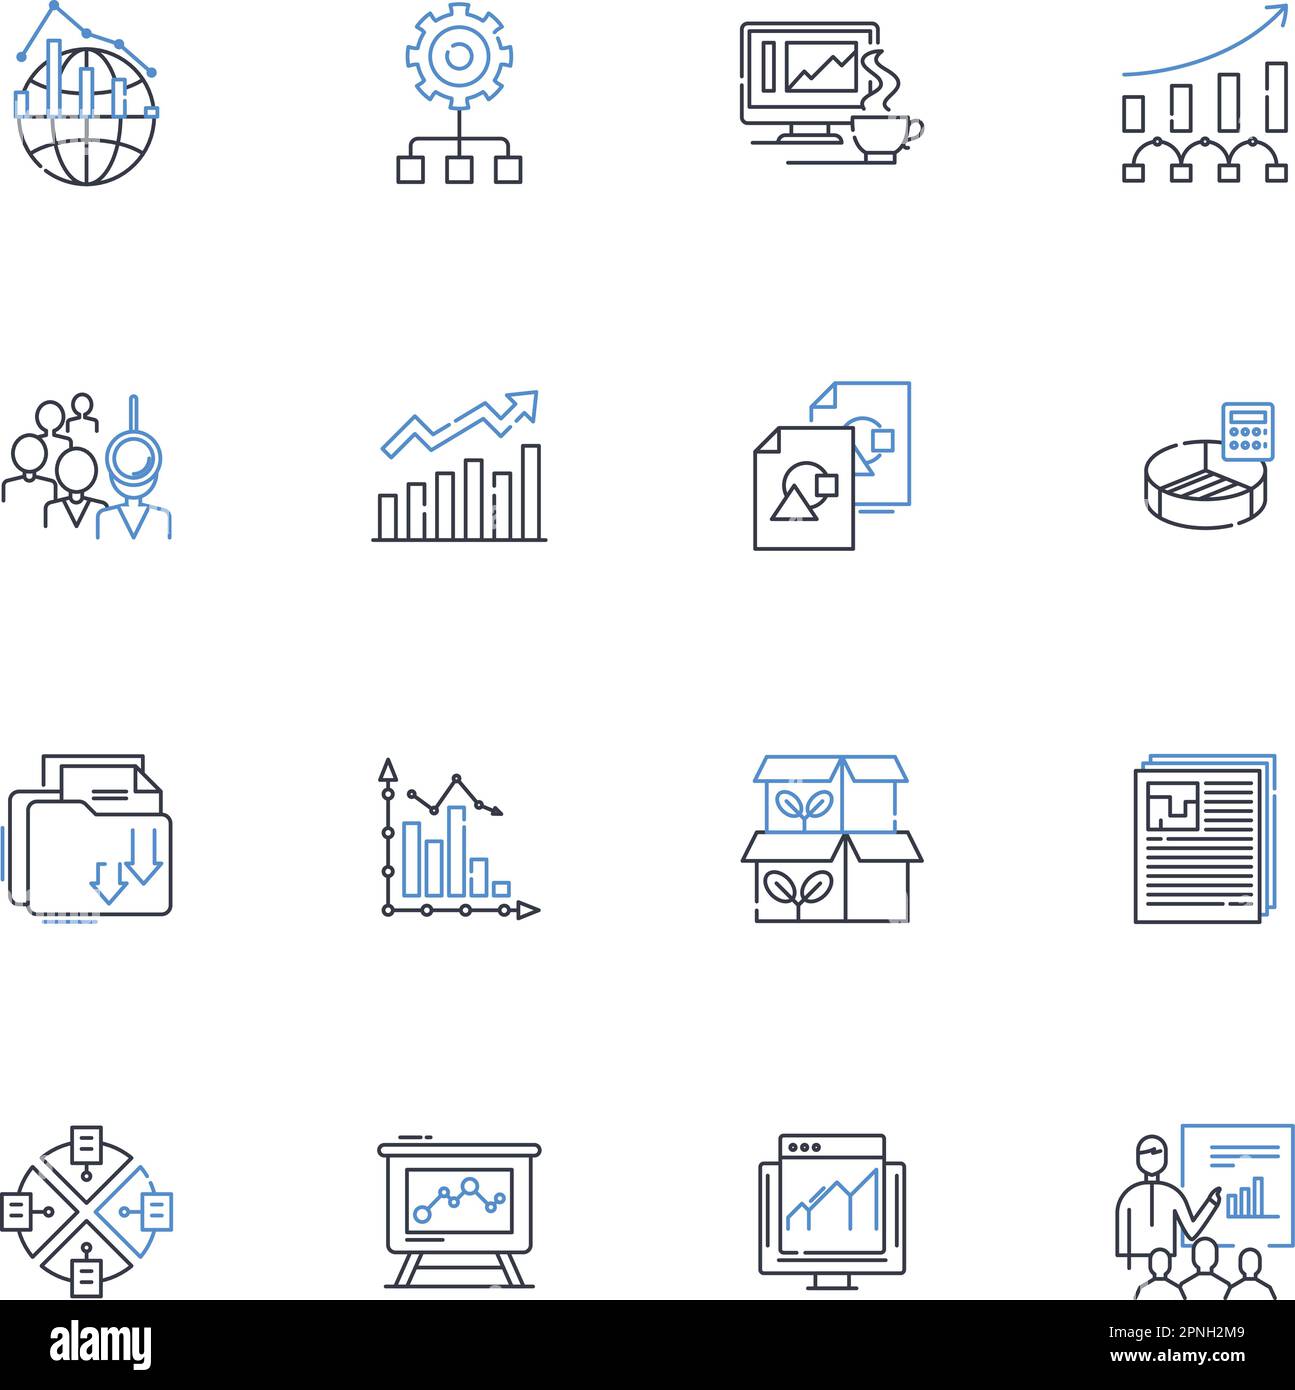 Data organization platform line icons collection. Categorization, Indexing, Structuring, Sorting, Classification, Segmentation, Analytics vector and Stock Vector